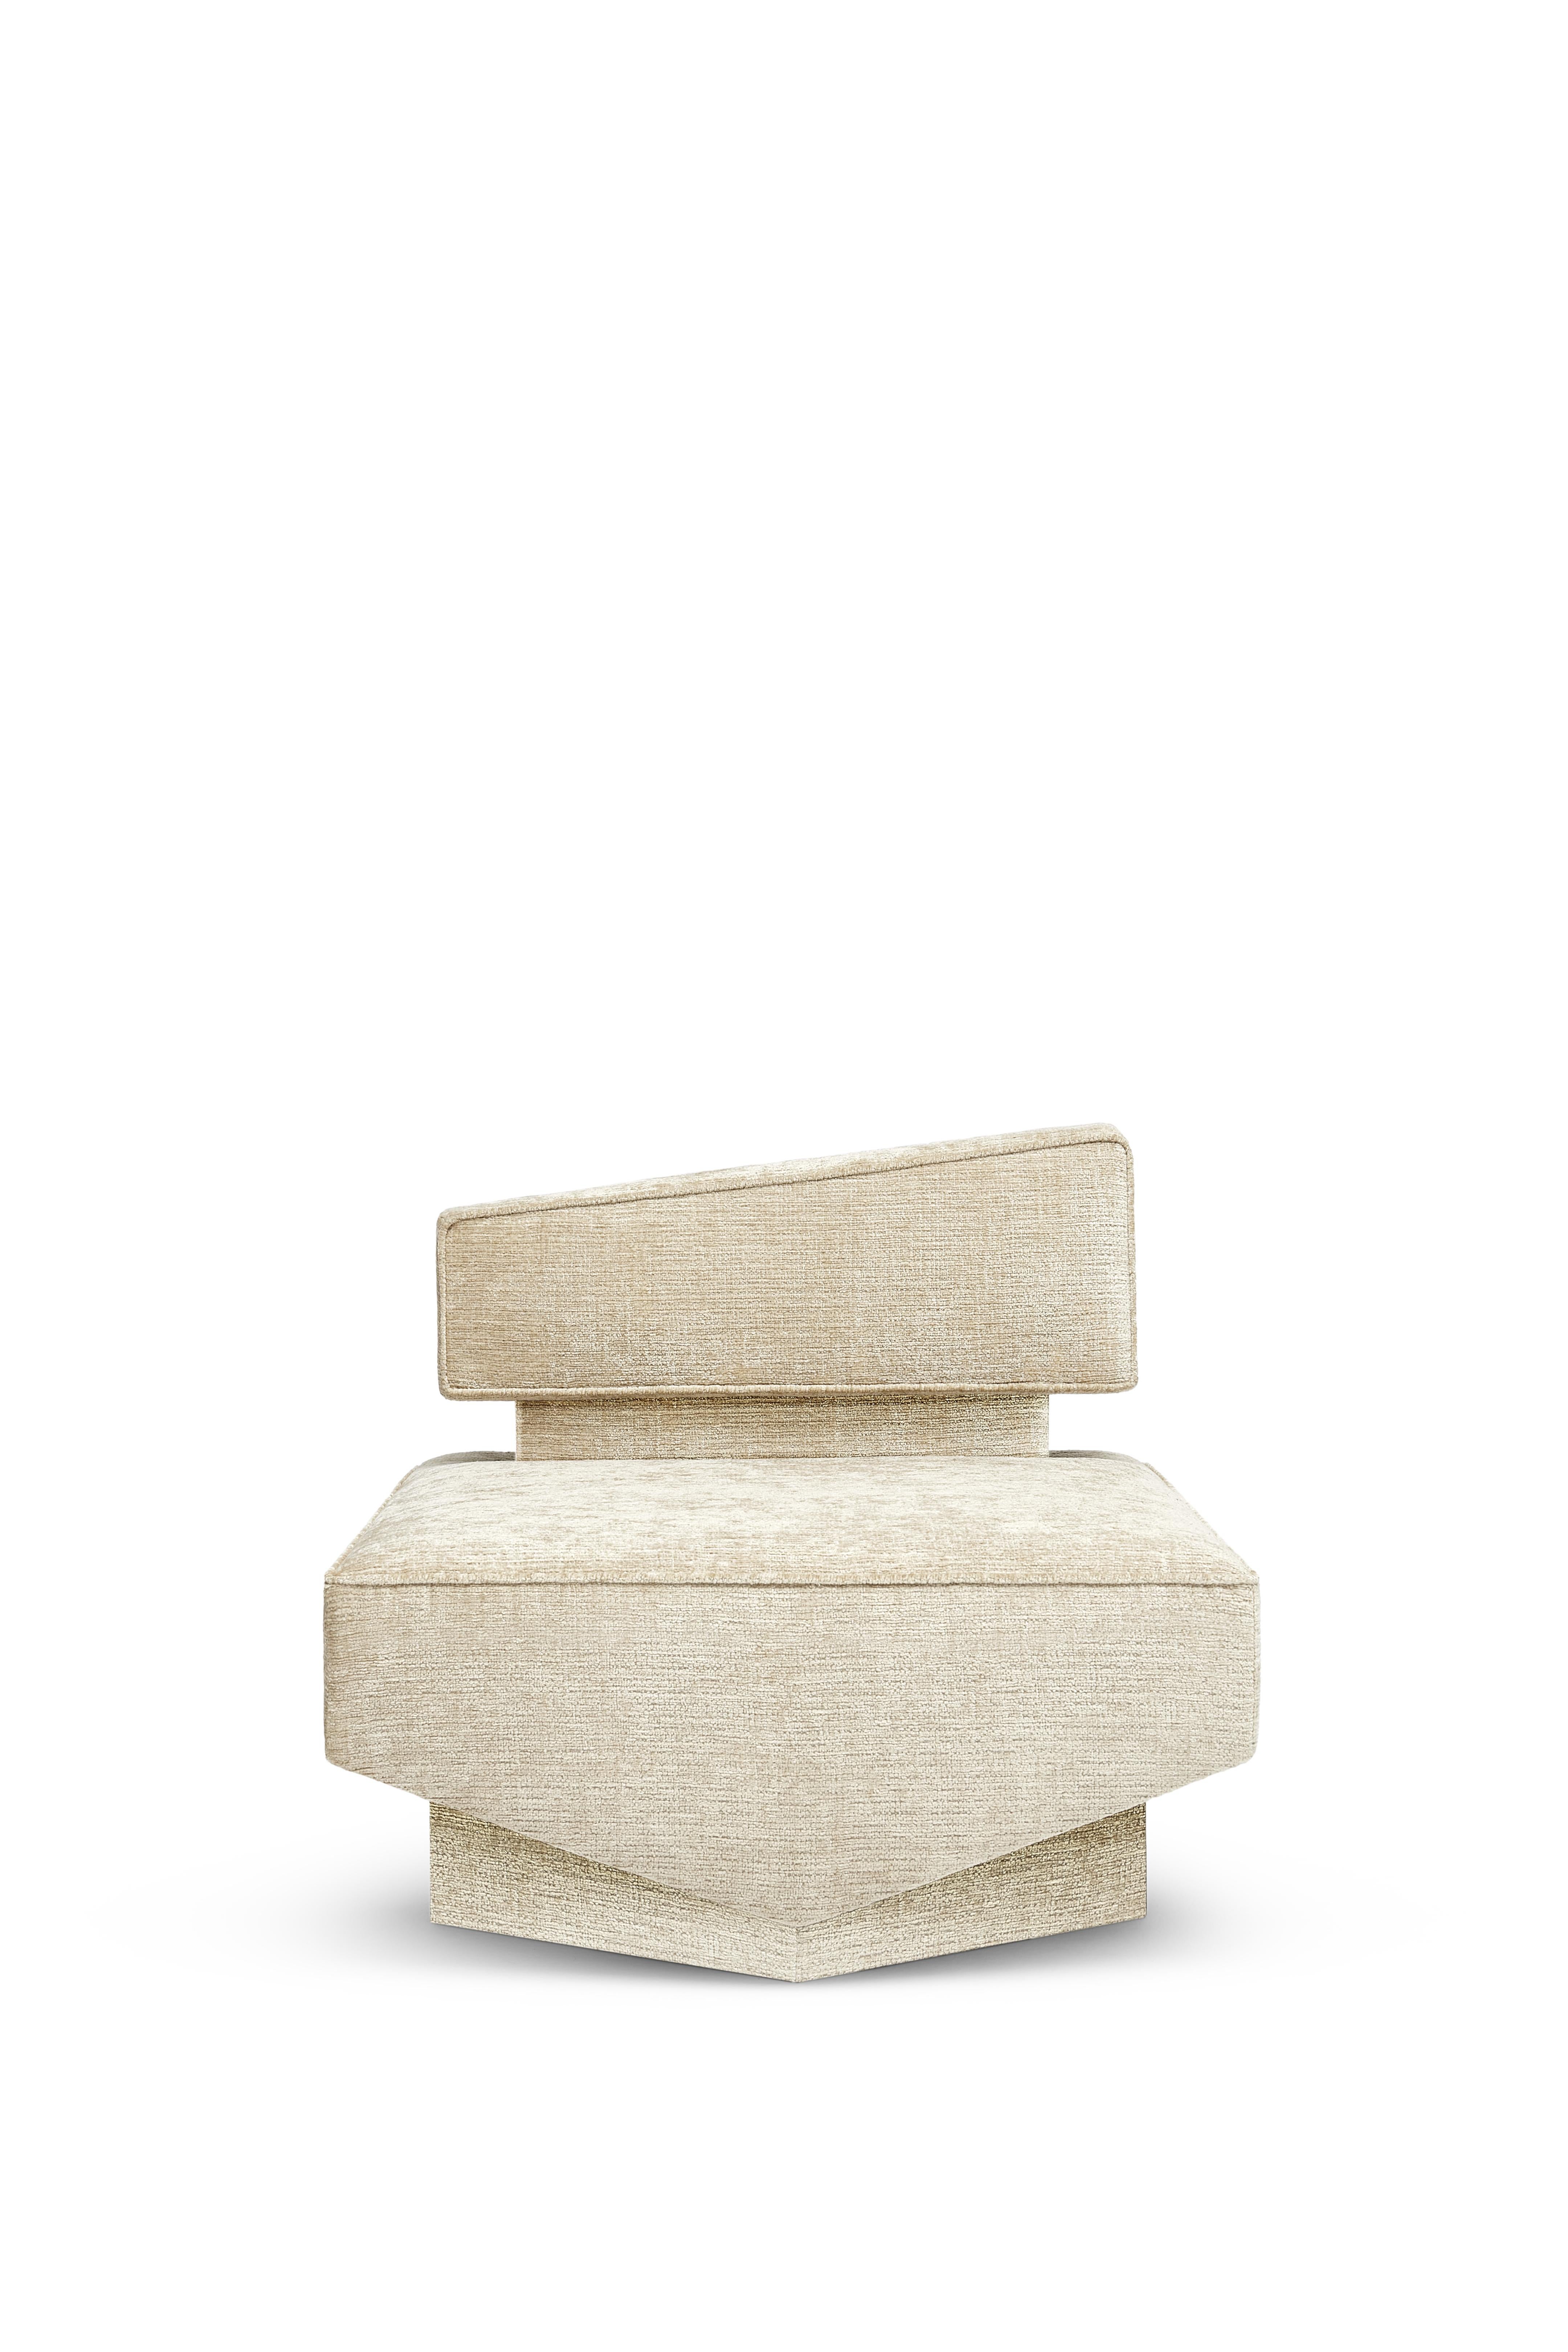 Wool Contemporary Armchair 'Divergent' by Marta Delgado, Walnut, White For Sale